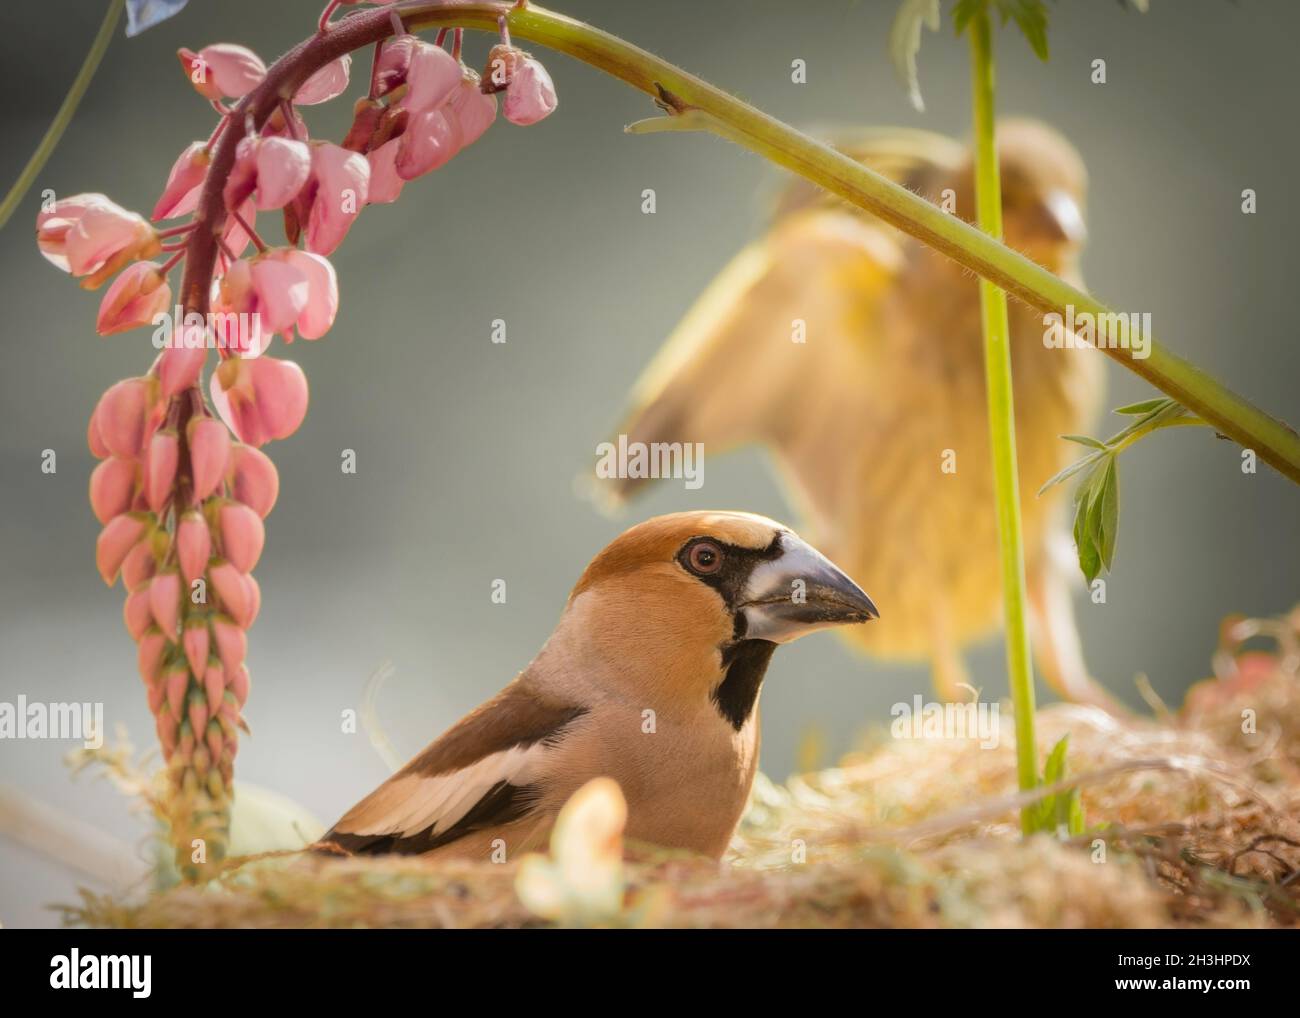 hawfinch standing on moss under lupine flower with finch flying in the back Stock Photo